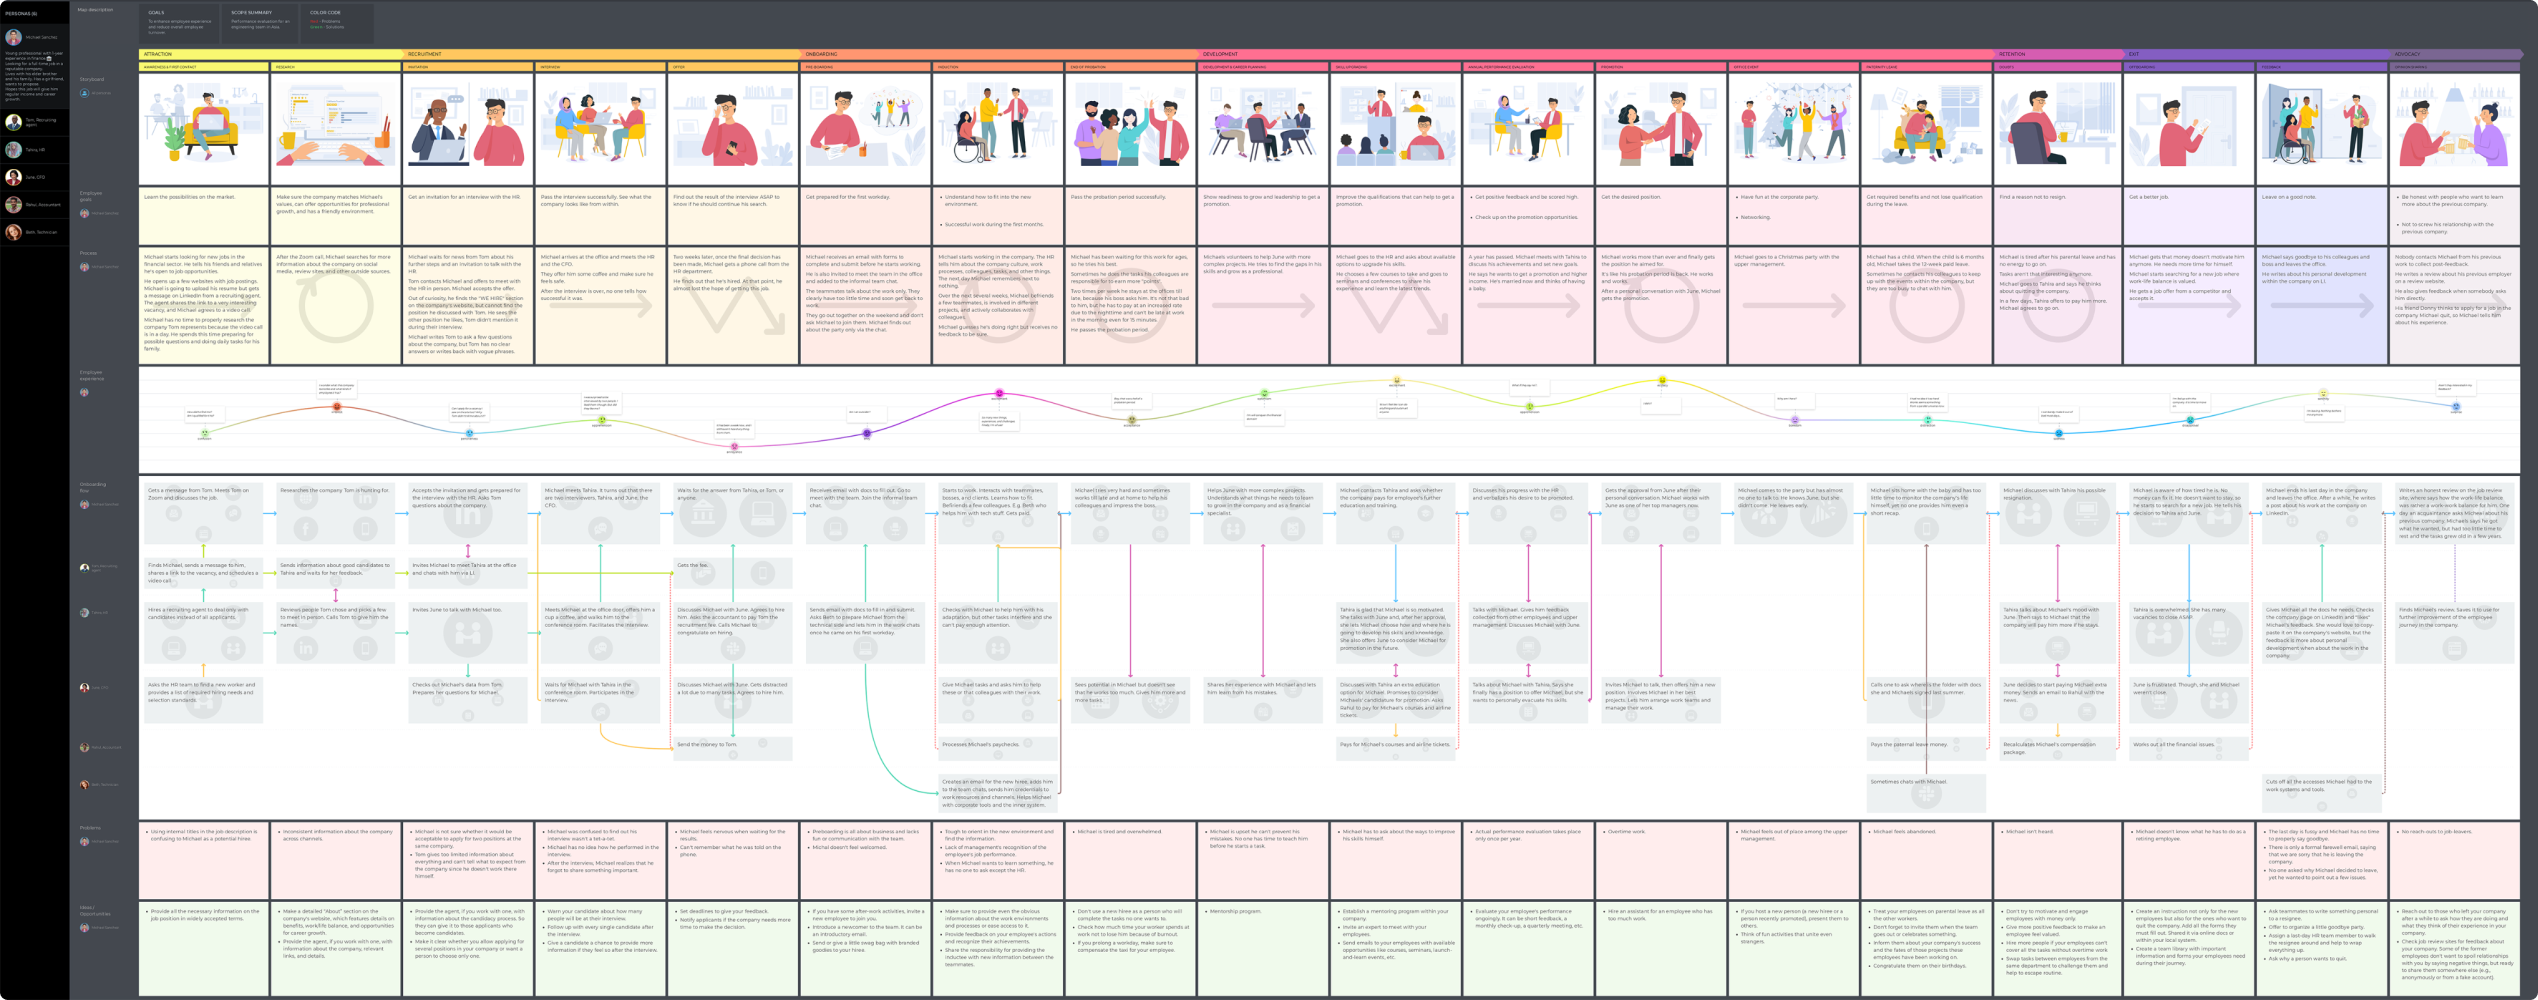 End-to-end employee journey map